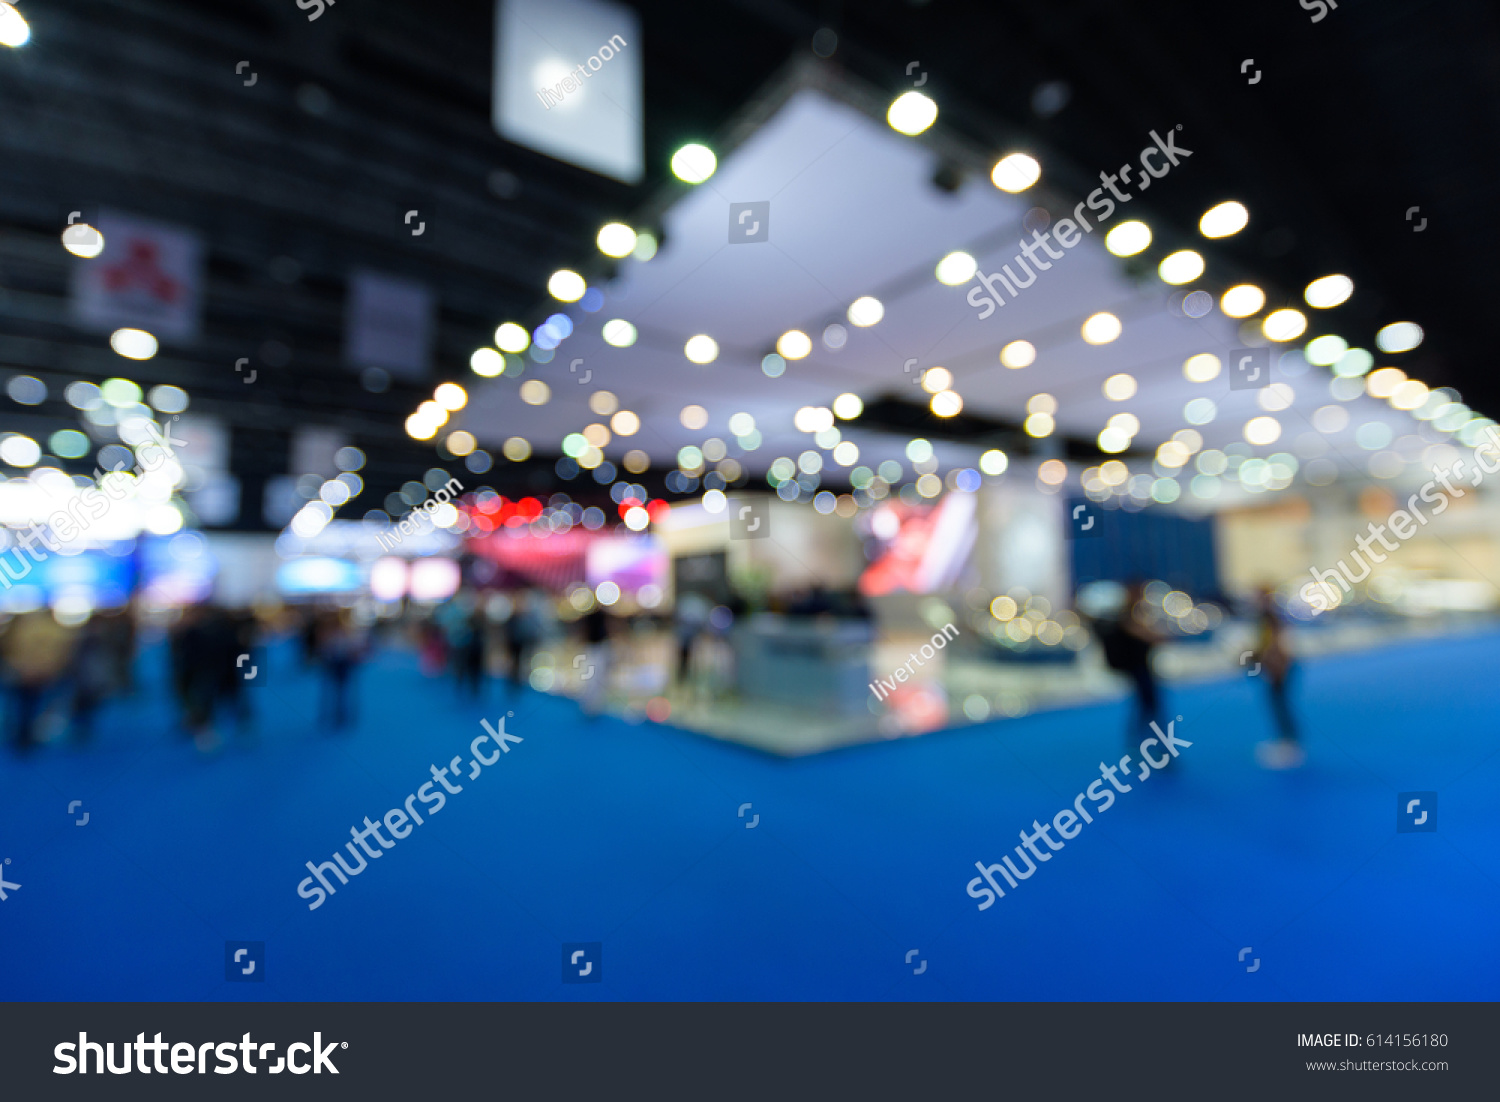 Blurred background of event exhibition show public hall, business trade concept #614156180